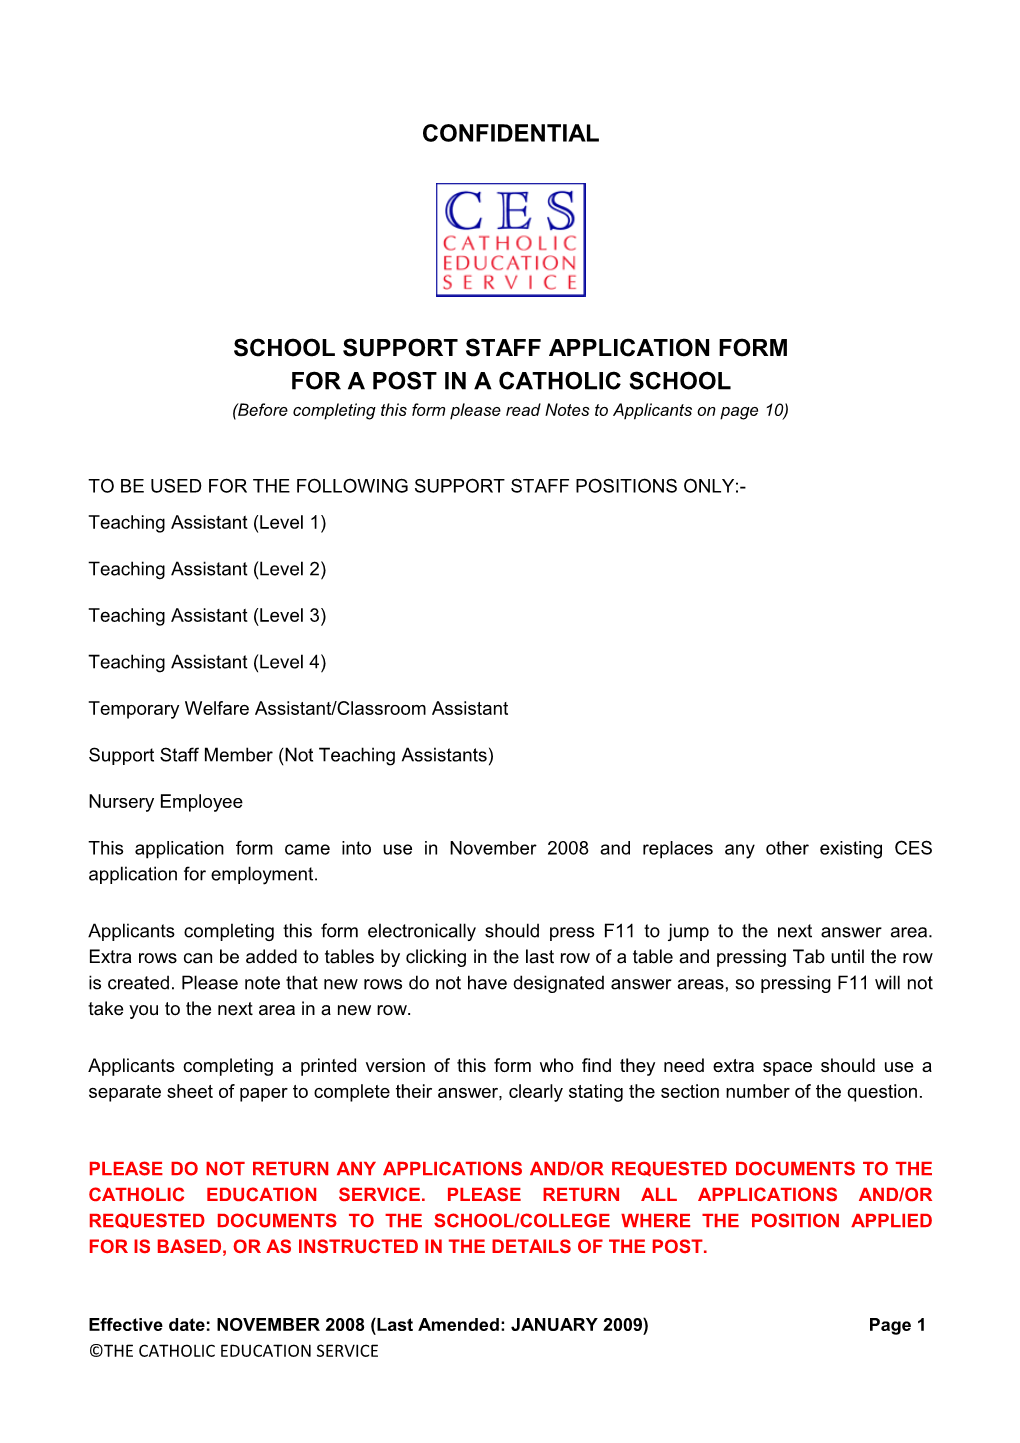 School Support Staff Application Form for a Post in a Catholic School s5